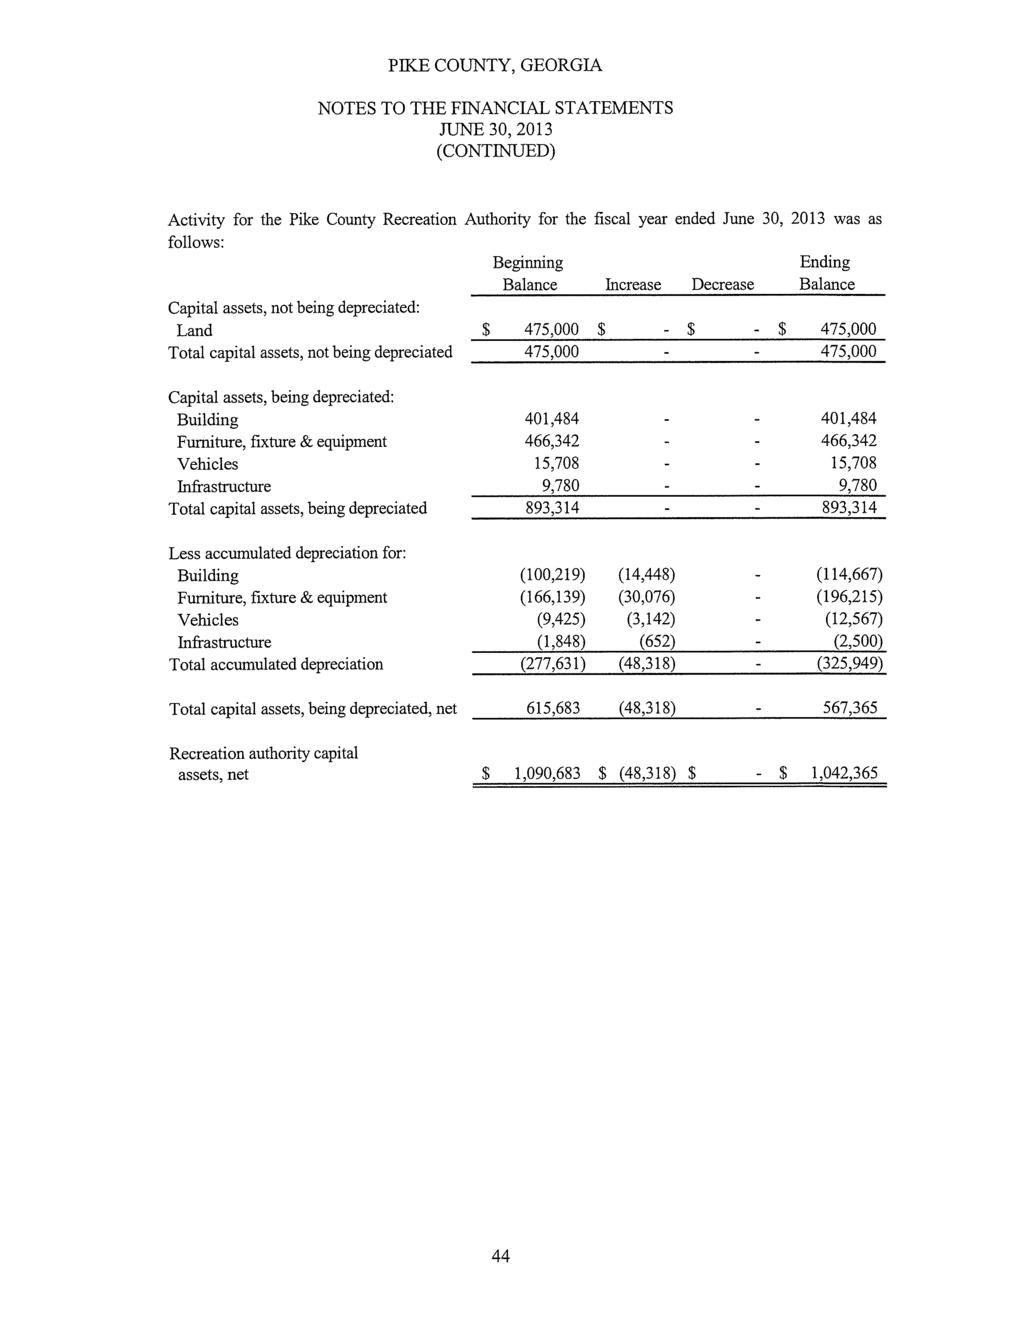 NOTES TO THE FINANCIAL STATEMENTS JUNE 30, 2013 (CONTINUED) Activity for the Pike County Recreation follows: Capital assets, not being depreciated: Land Total capital assets, not being depreciated